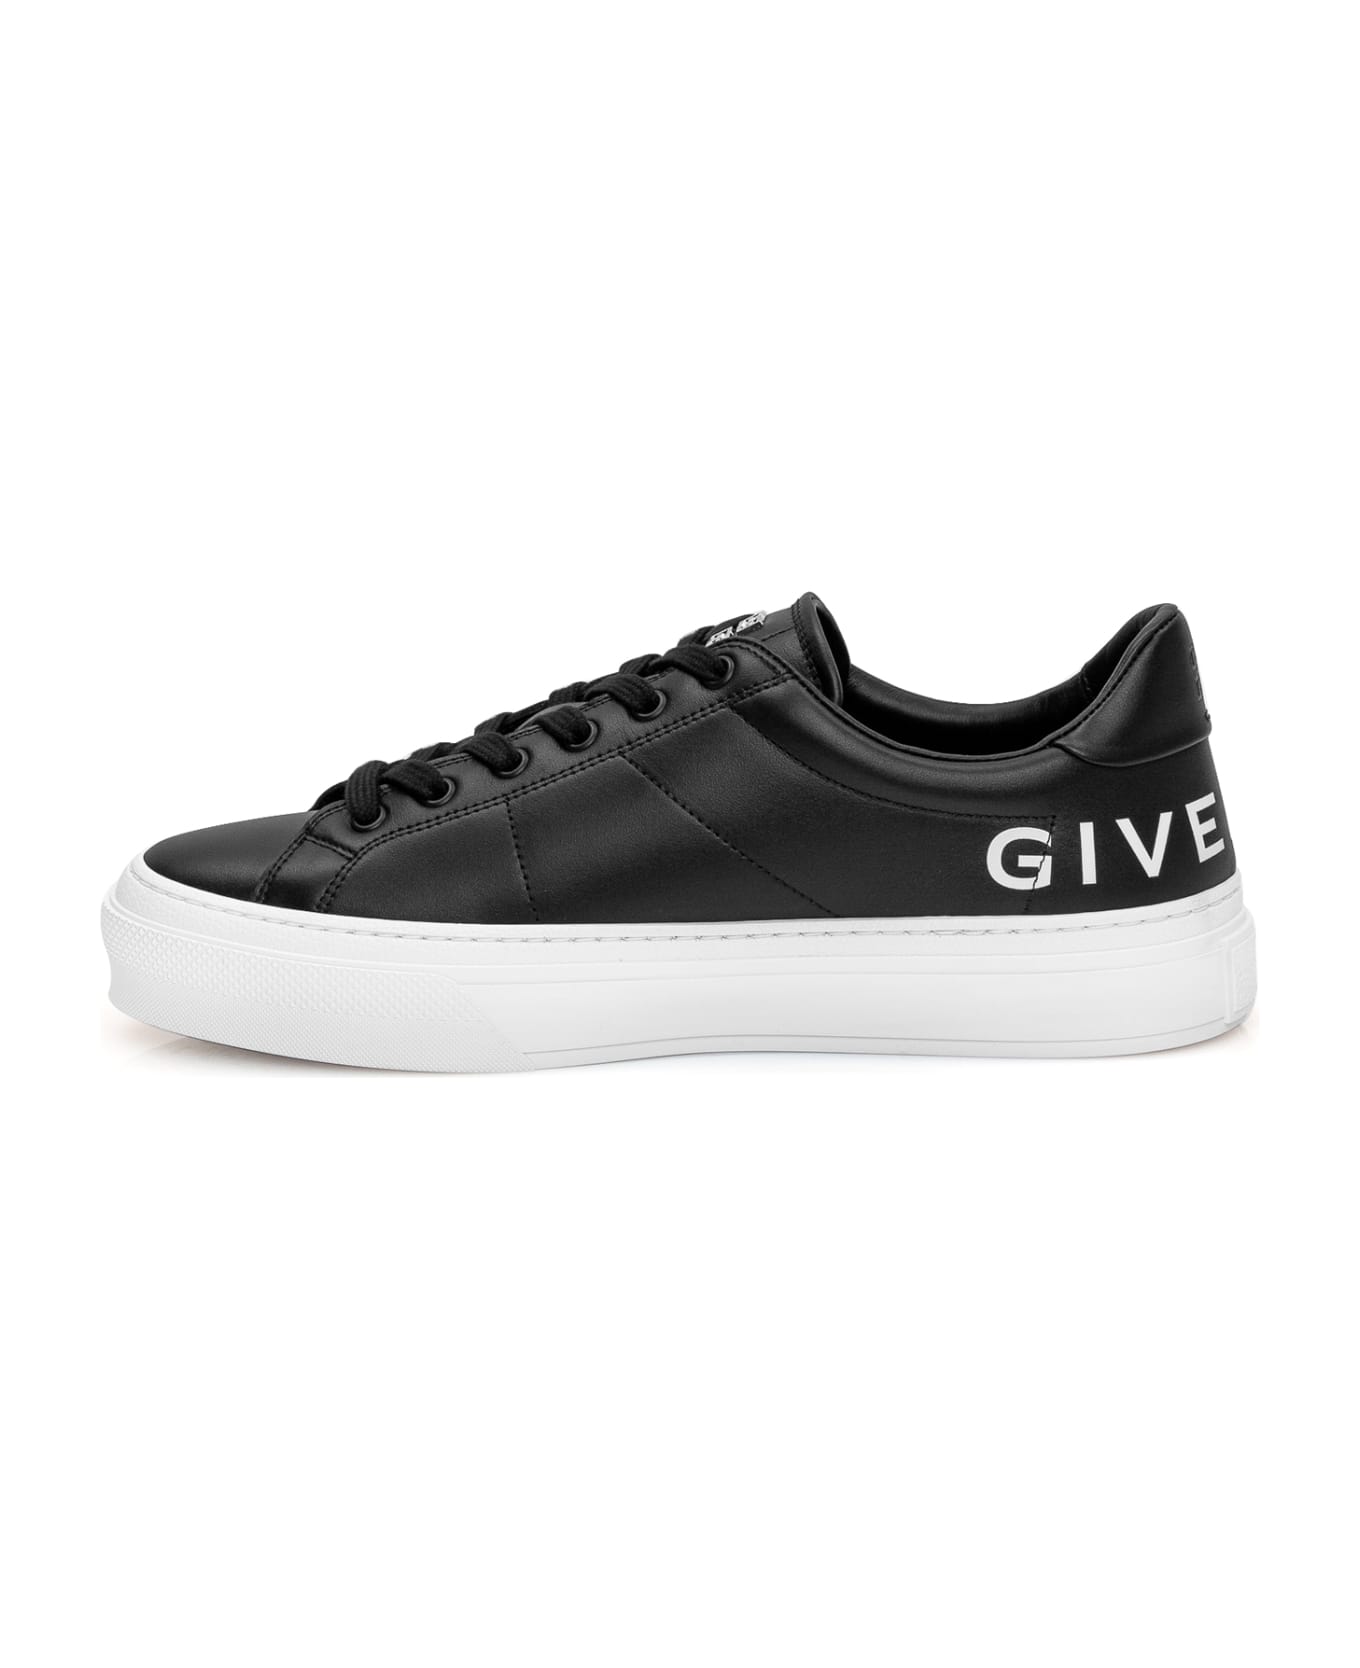 Givenchy Black City Sport Sneakers With Printed Logo - Black/white